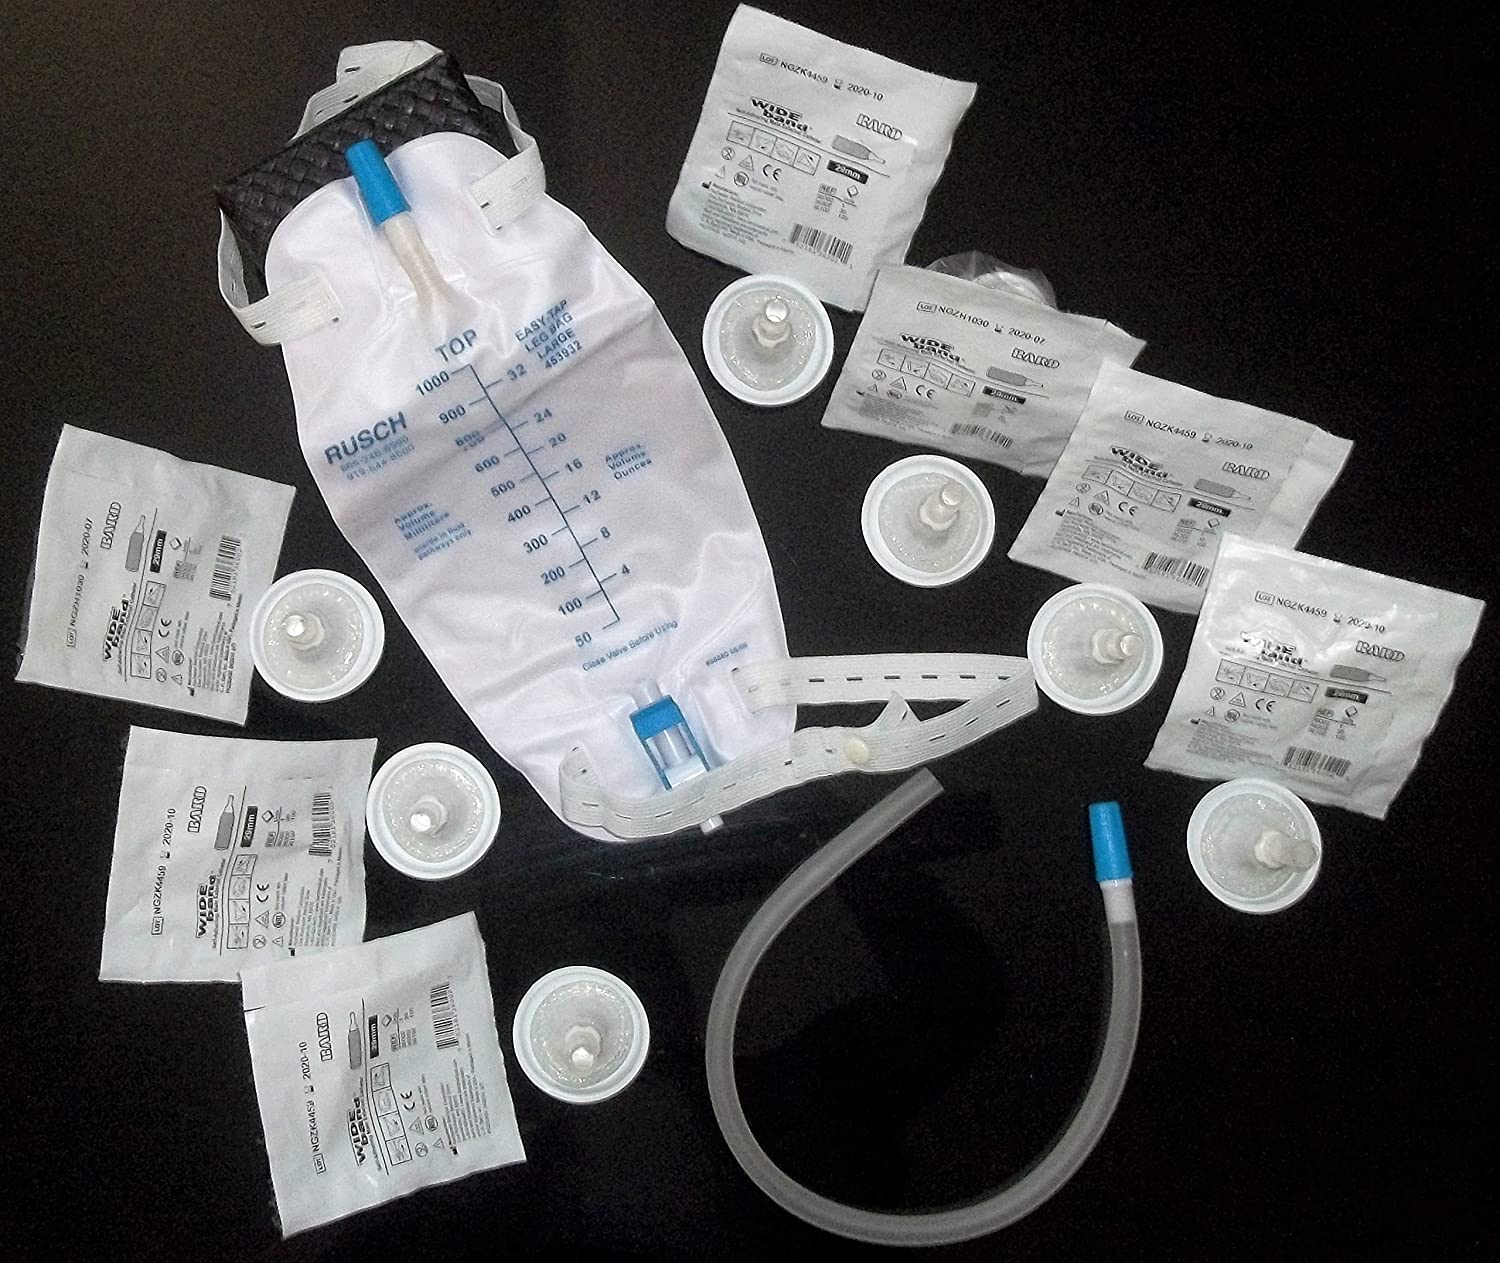 Urinary Kits 1-Week Kits 1-Week Urinary Incontinence  Kit (41mm WideBands) by Veteran Medical Supplies online store selling catheters, drainage bags, urinary kits centrally located in Kansas City Missouri shipping to the entire United States